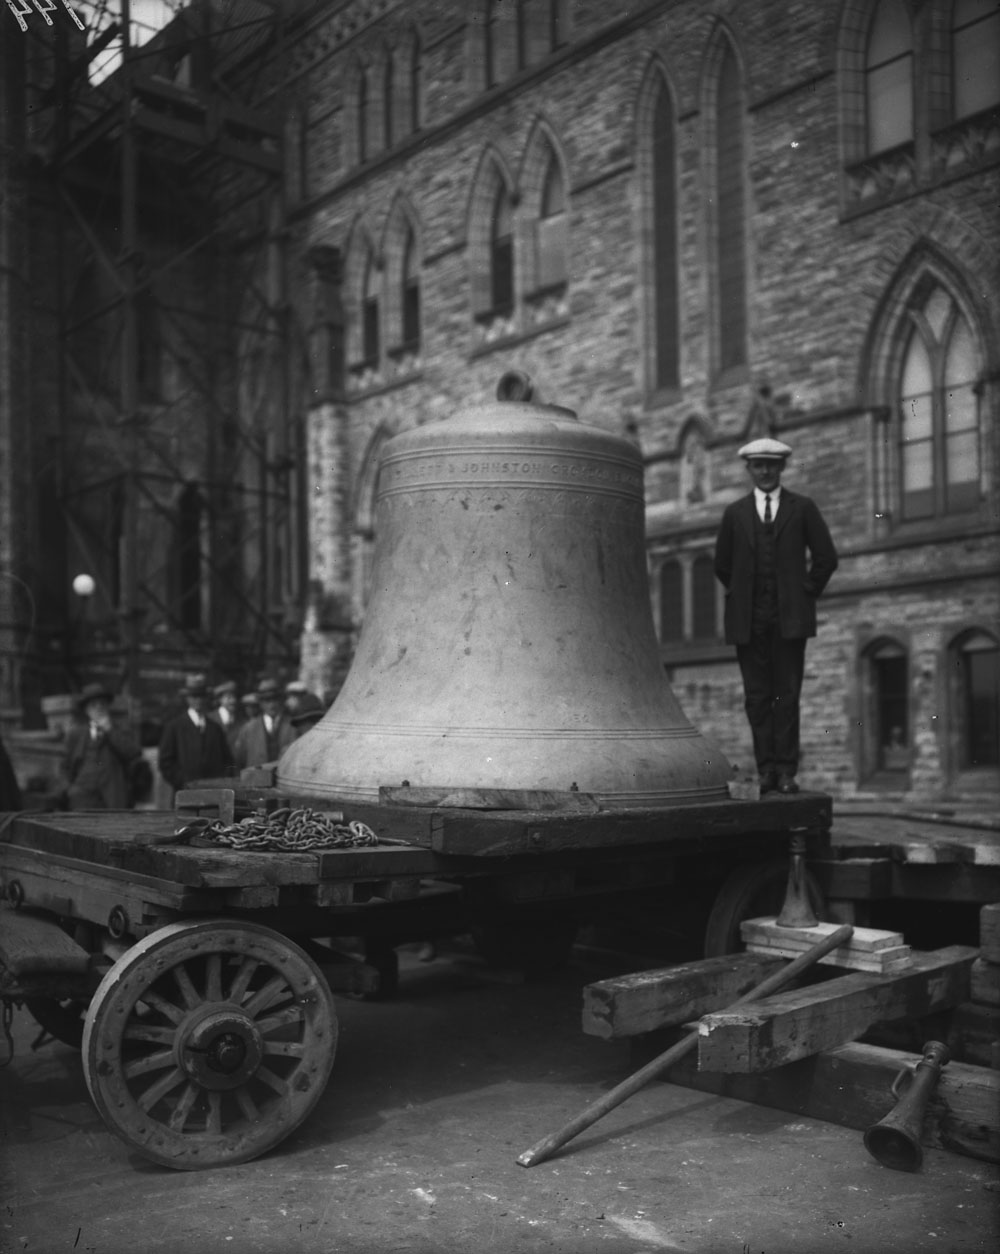 A massive carillon bell is delivered on Parliament Hill in 1927. The tallest bell in the Peace Tower carillon is 2.1 metres high. (Photo credit: Library and Archives Canada)